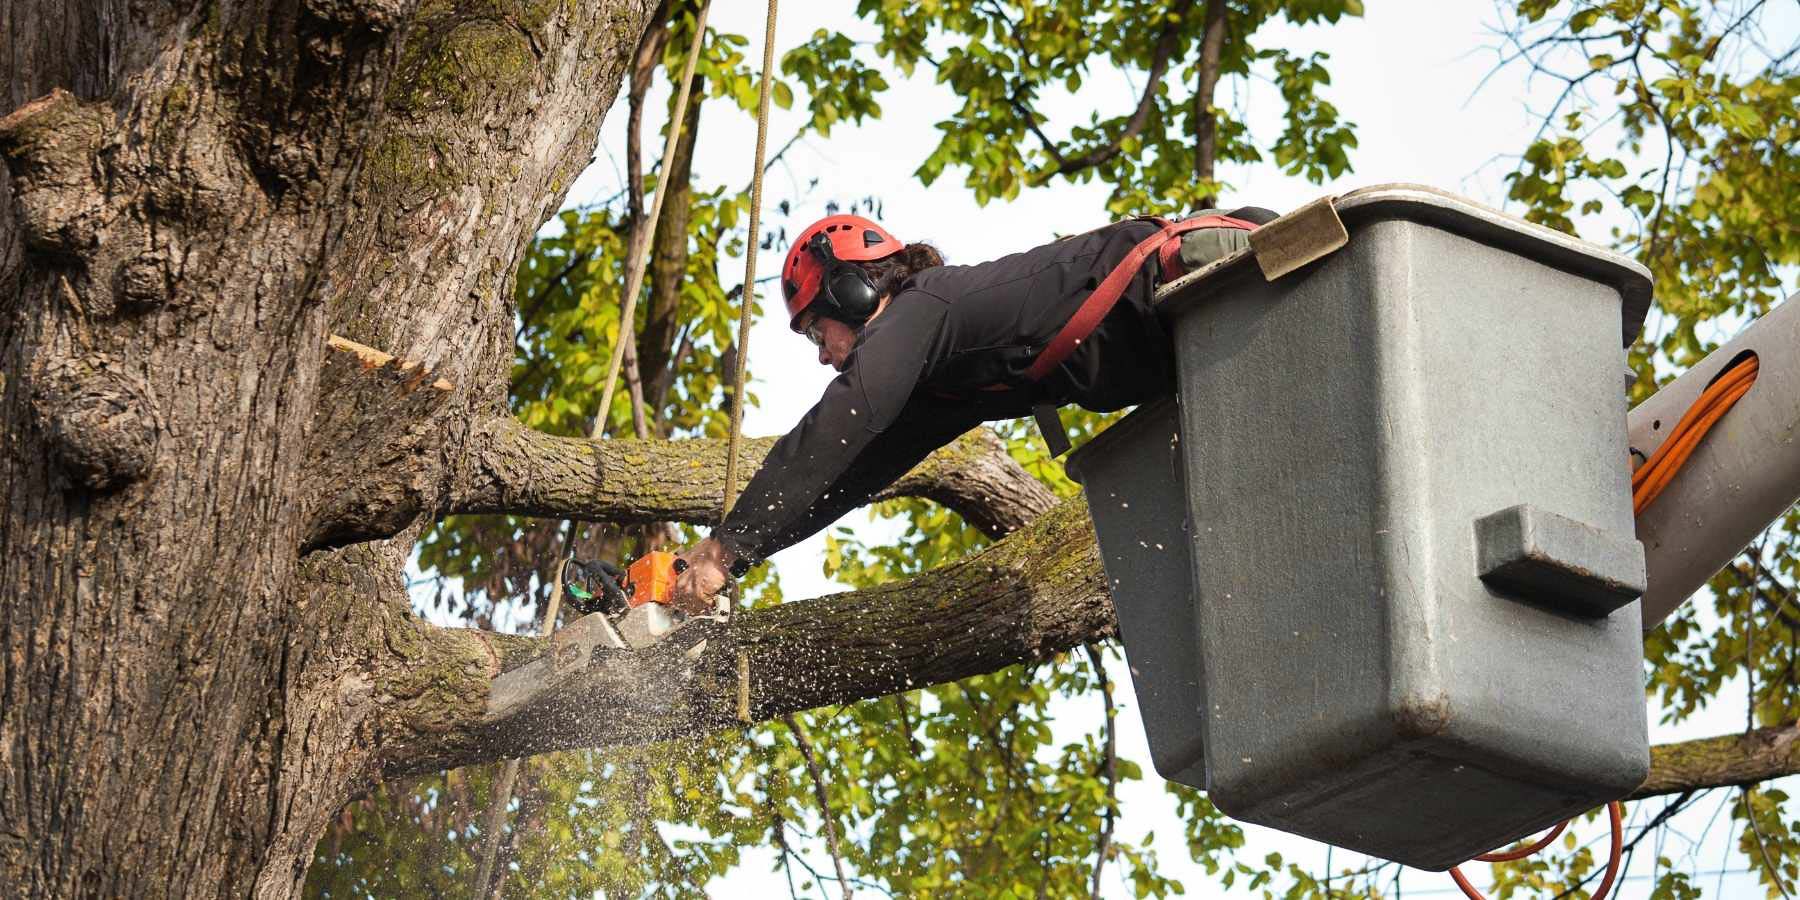 professional arborist using a chainsaw to cut a thick branch off a large tree trunk